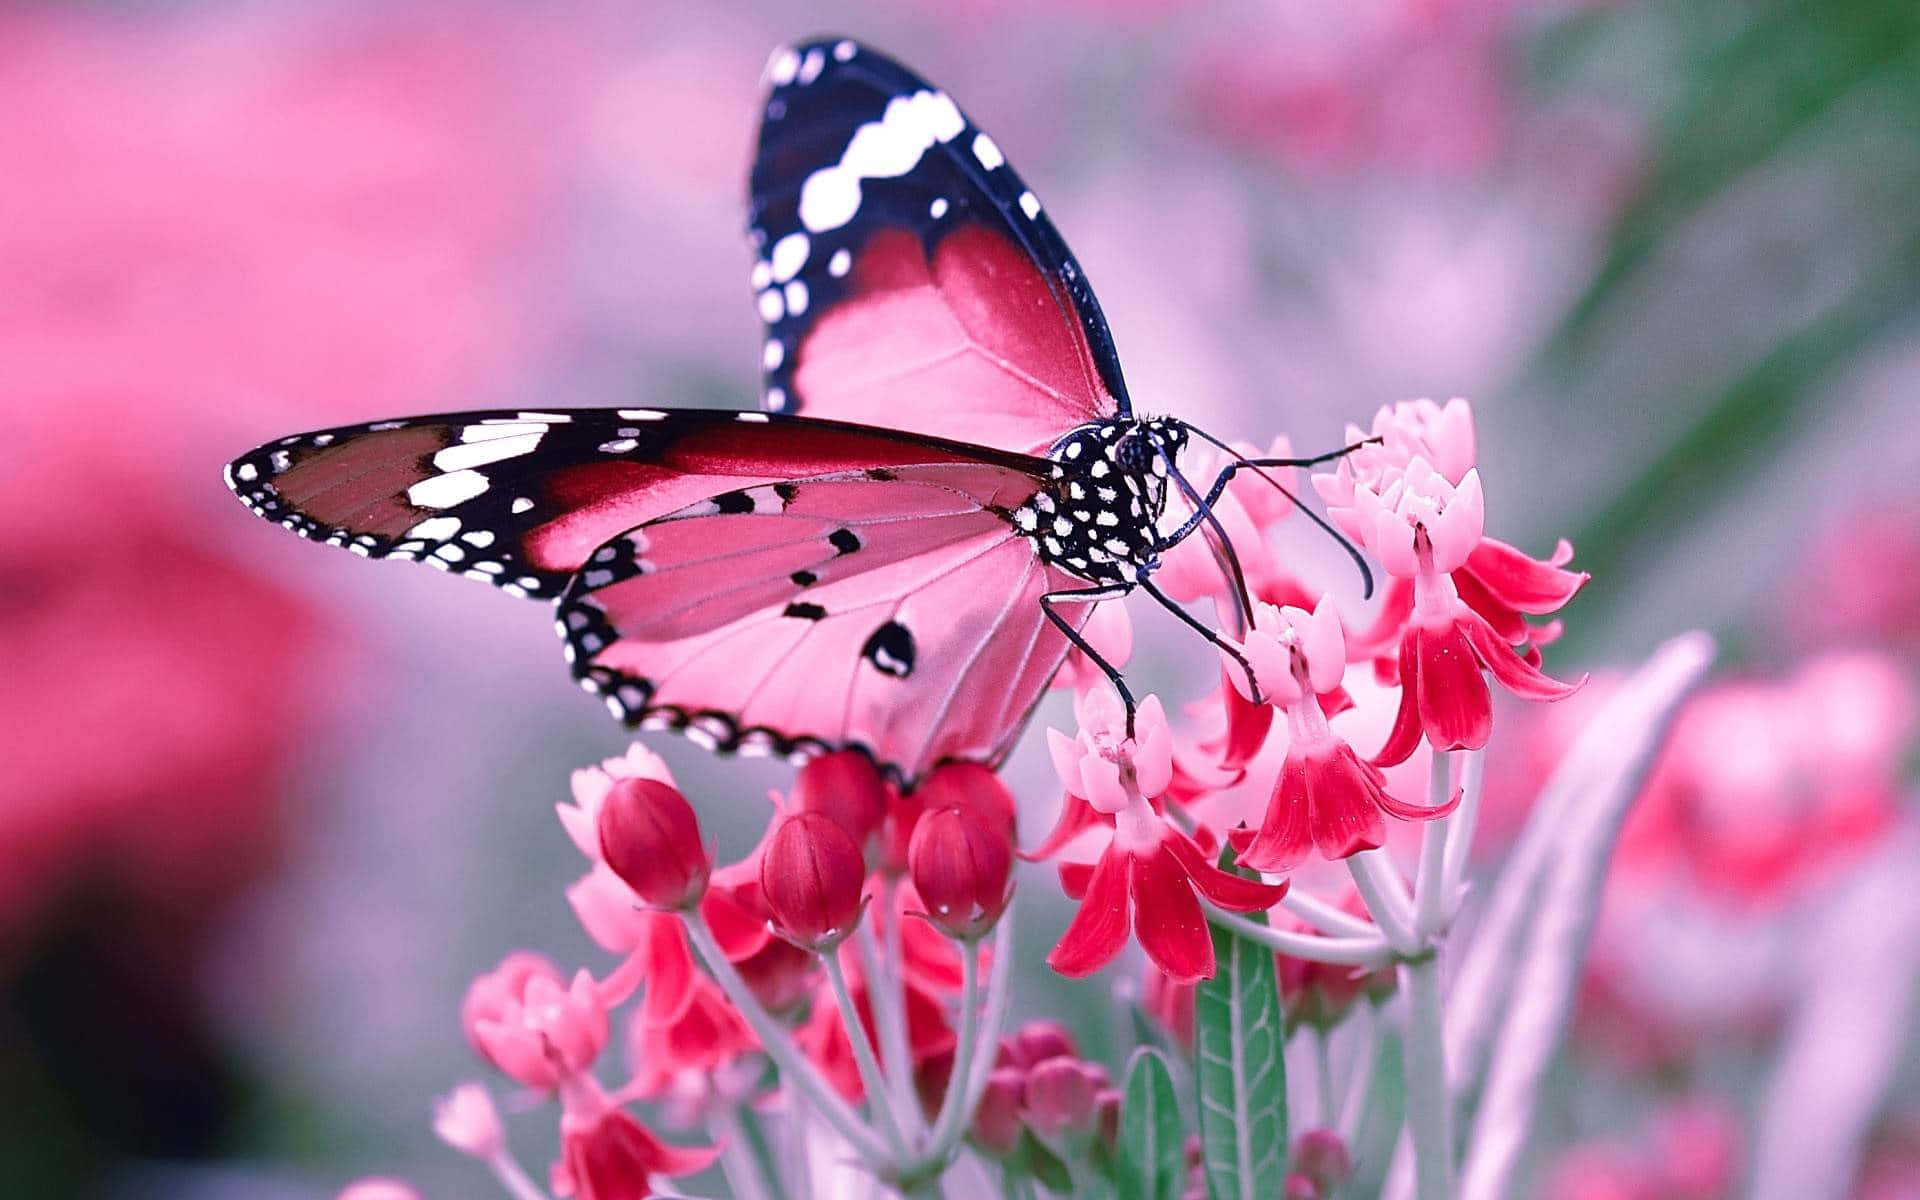 "Witness the beauty of nature with Butterfly Watching" Wallpaper